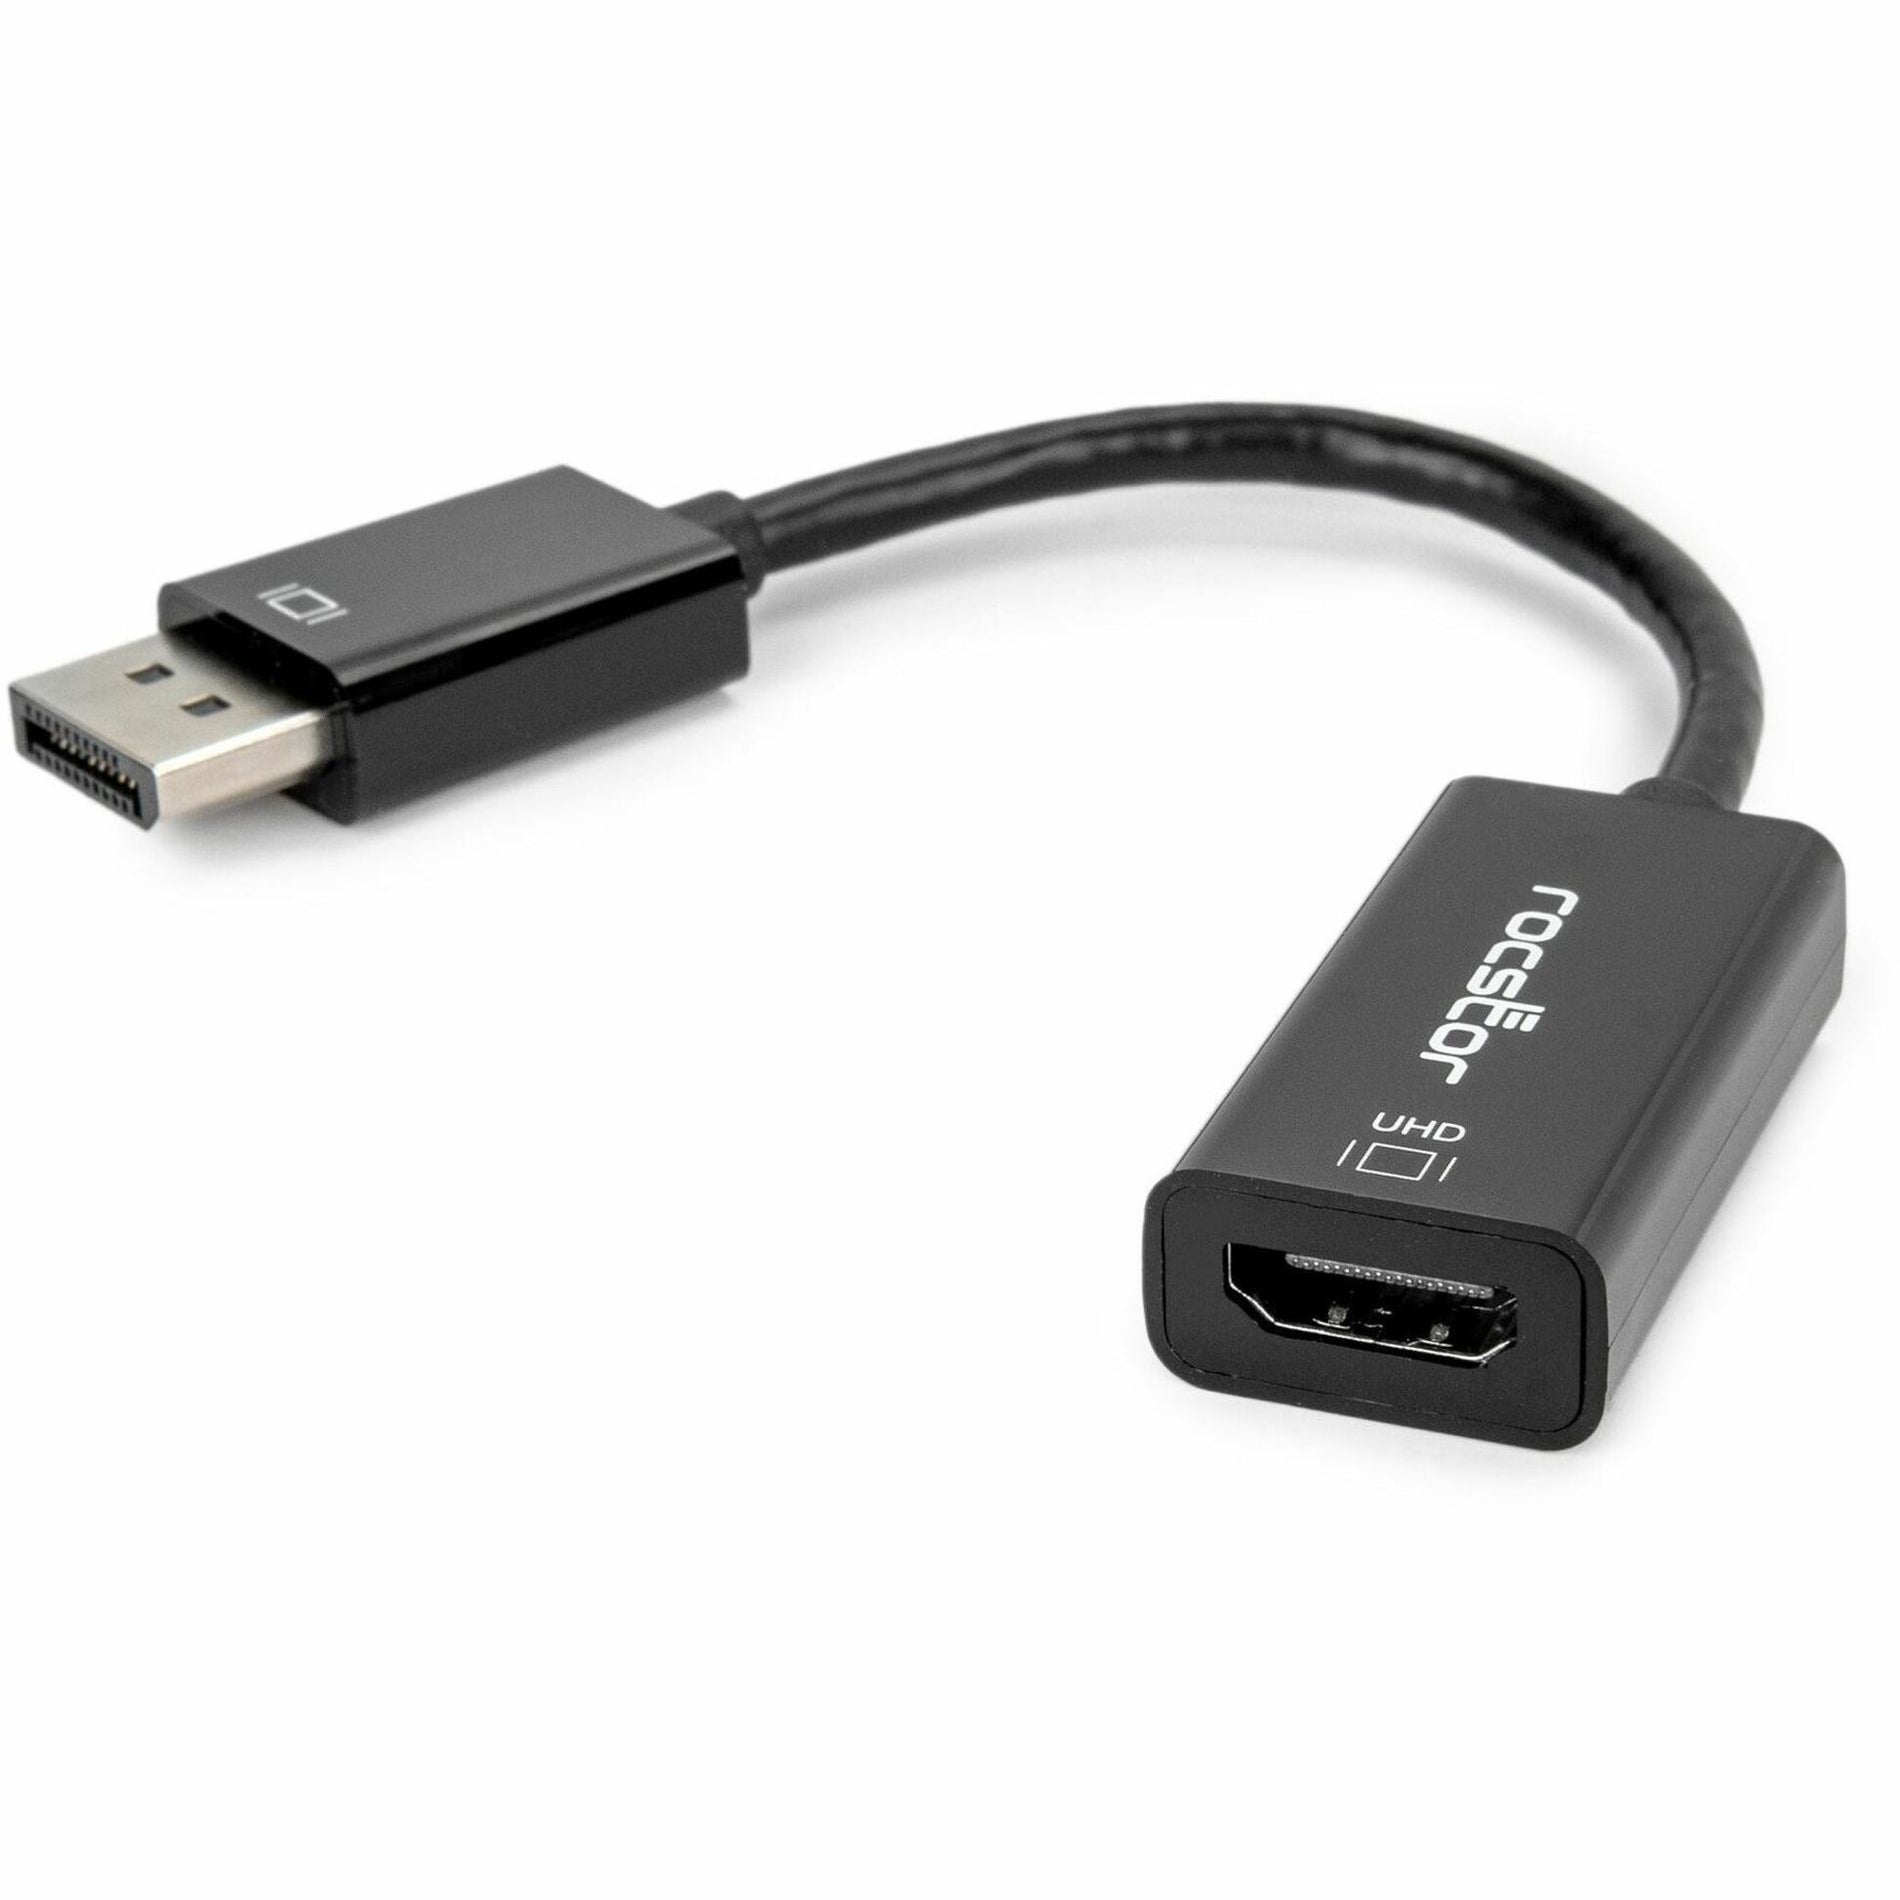 Rocstor Y10A101-B2 DisplayPort 1.2 to HDMI 4K/60Hz Active Adapter Converter - M/F - Black, Plug and Play, Lightweight